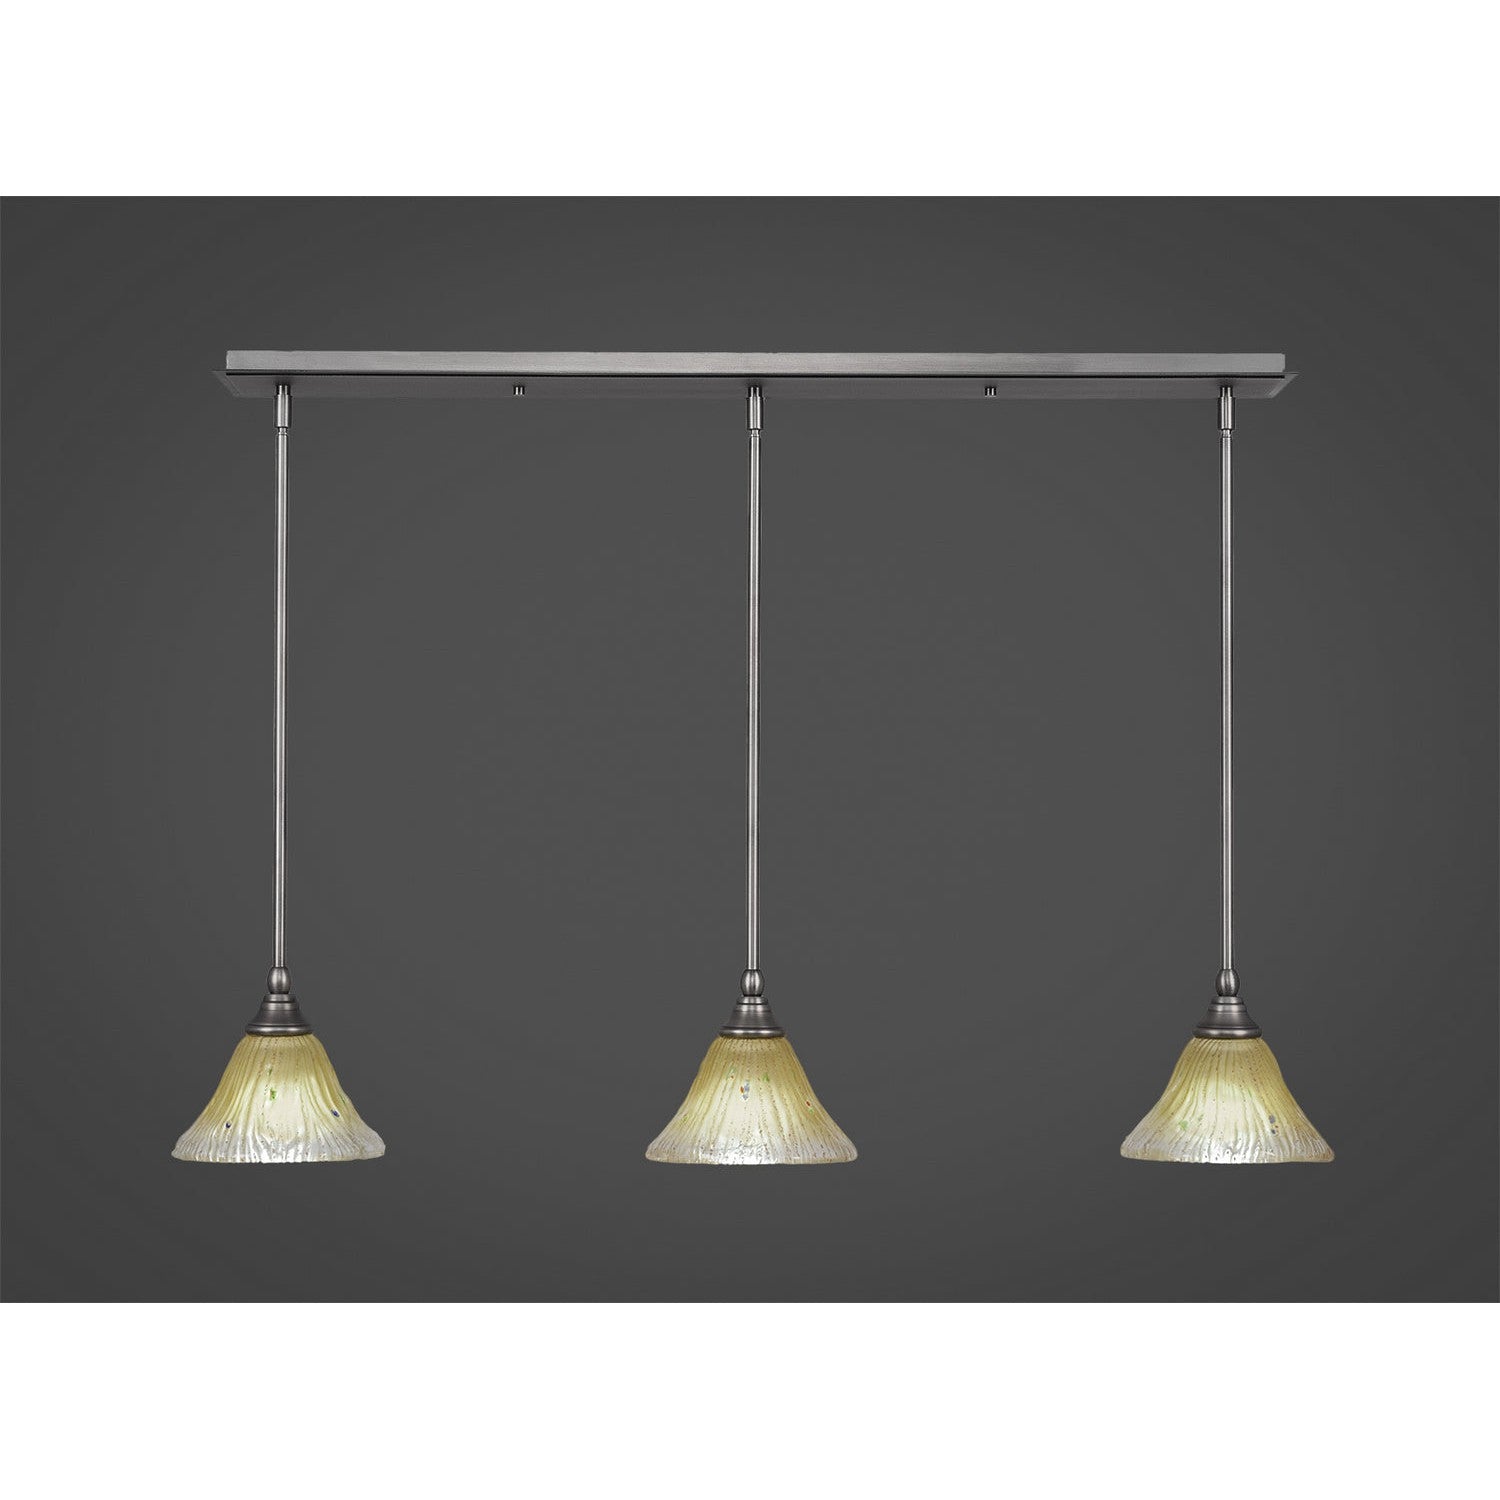 Toltec Any 36-bn-750 Pendant Light - Brushed Nickel